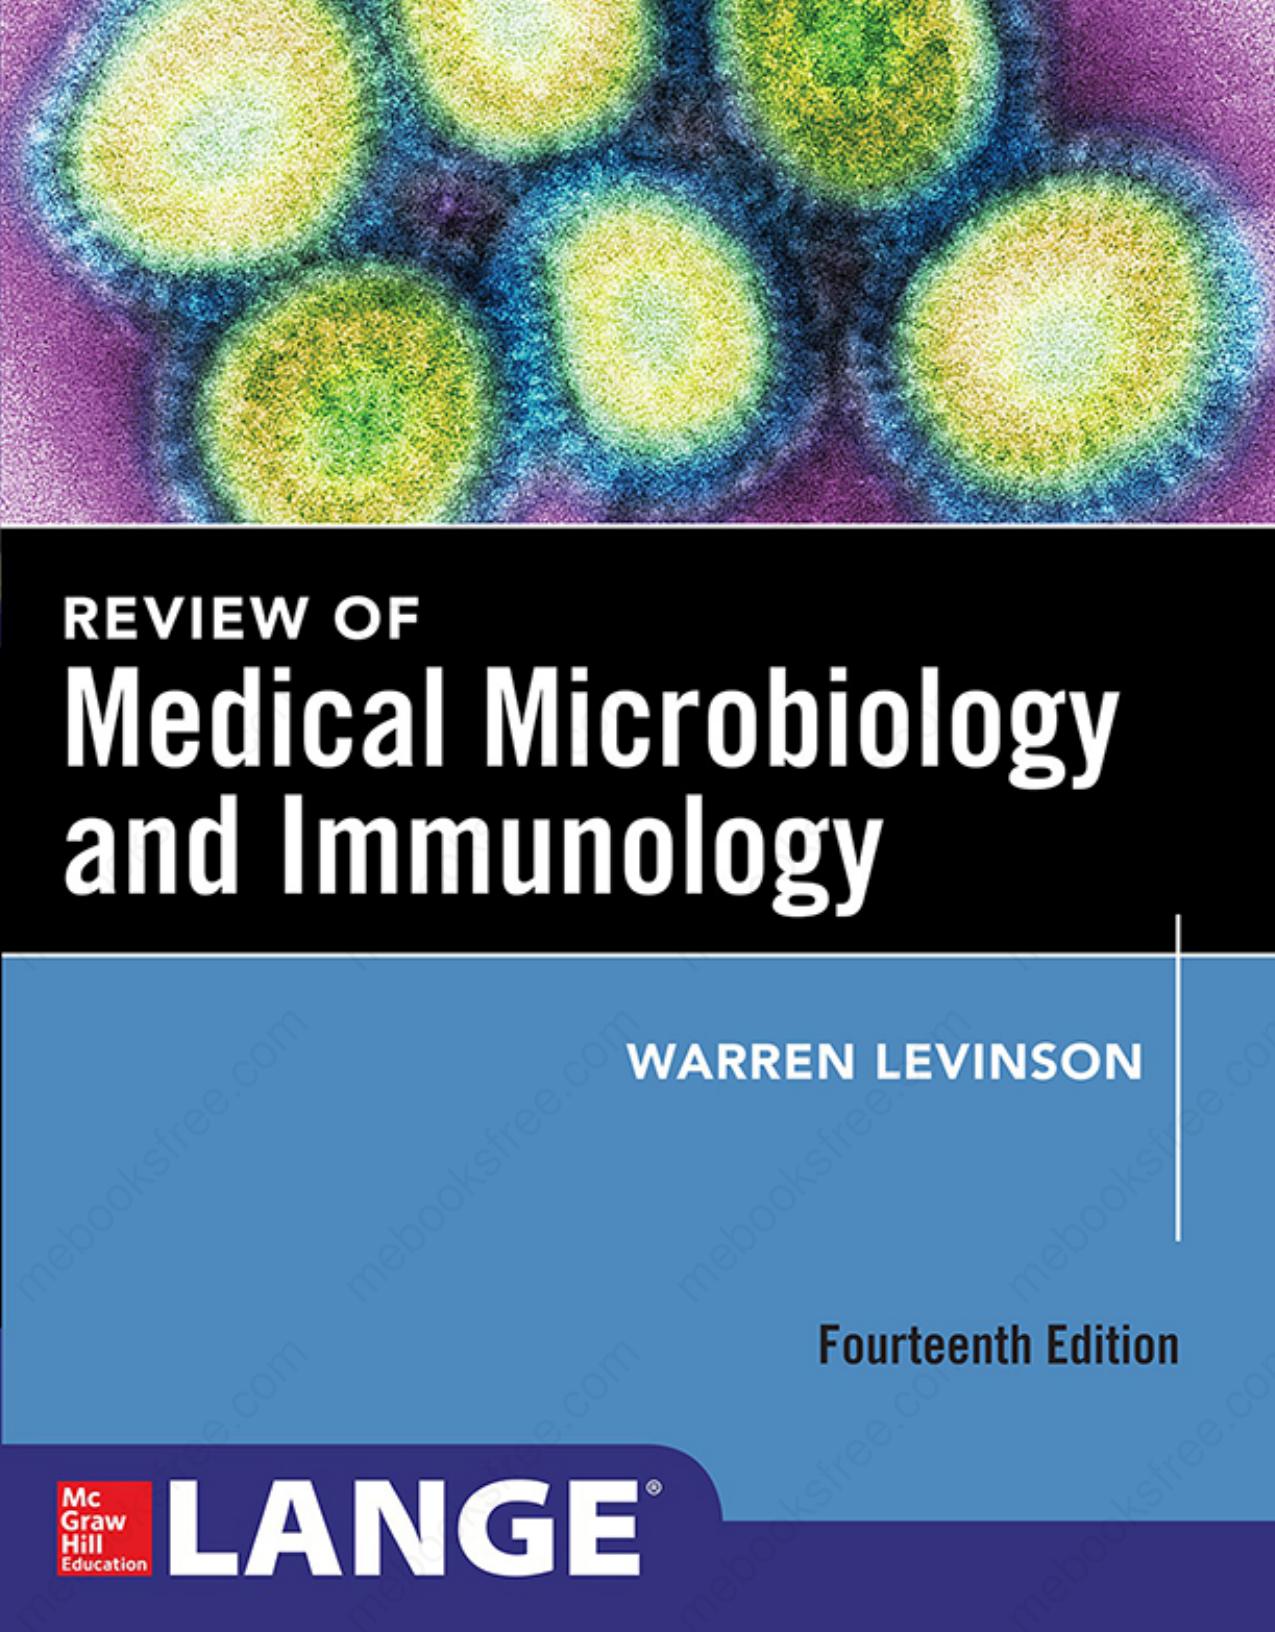 Review of Medical Microbiology and Immunology 14th ed. 2016.pdf